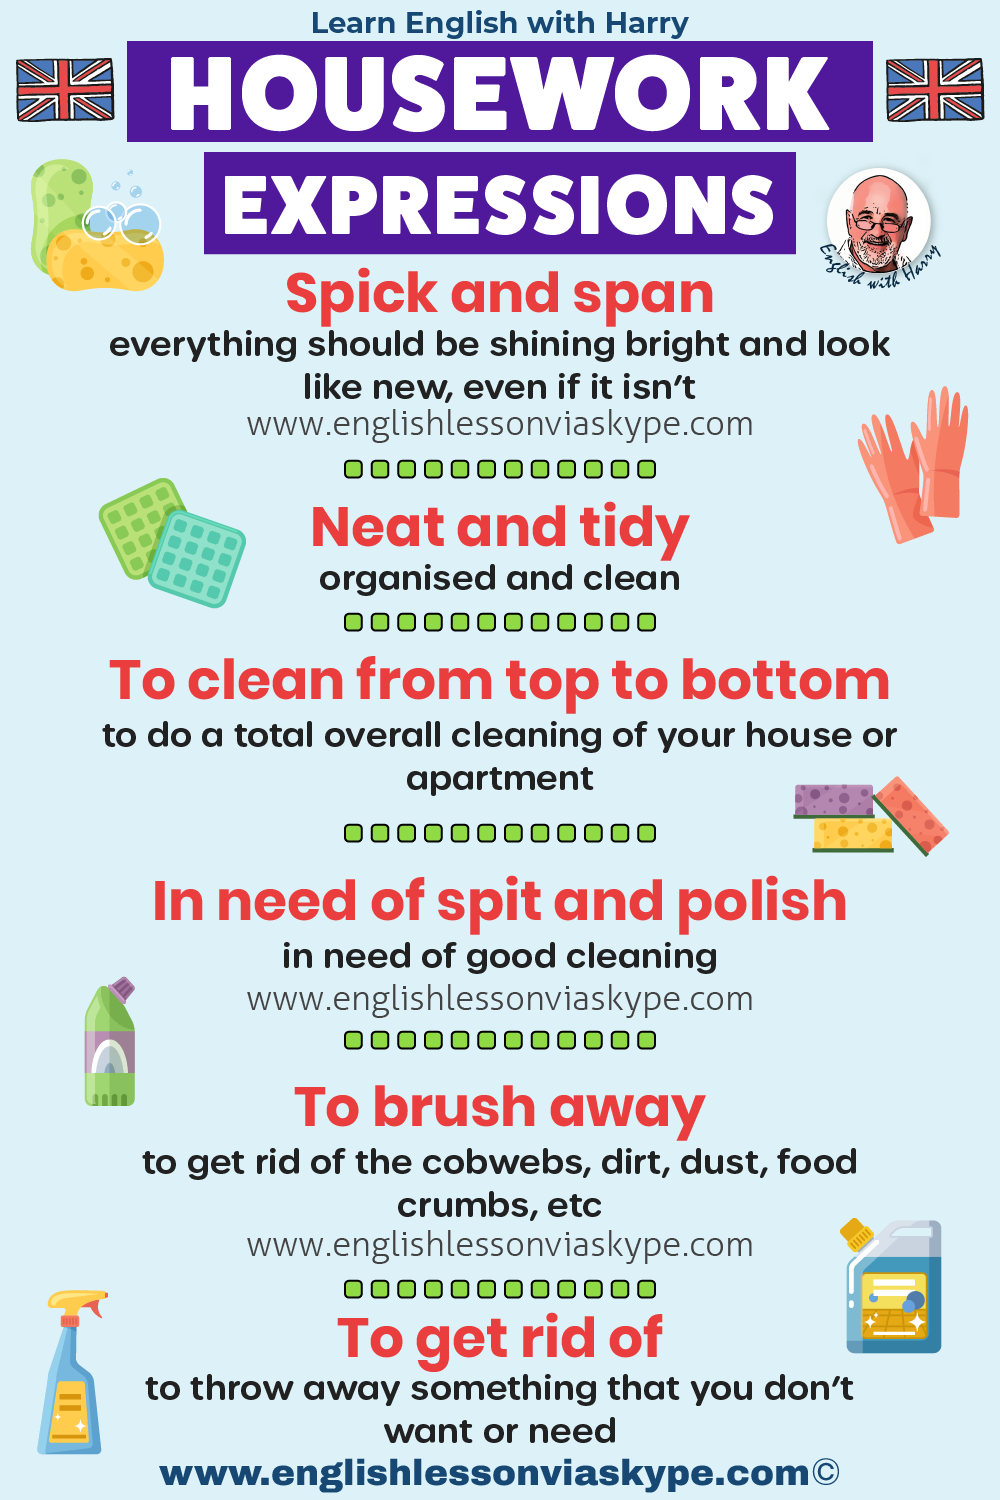 Vocabulary expressions related to housework. Study English advanced level. English lessons on Zoom and Skype www.englishlessonviaskype.com #learnenglish #englishlessons #EnglishTeacher #vocabulary #ingles #อังกฤษ #английский #aprenderingles #english